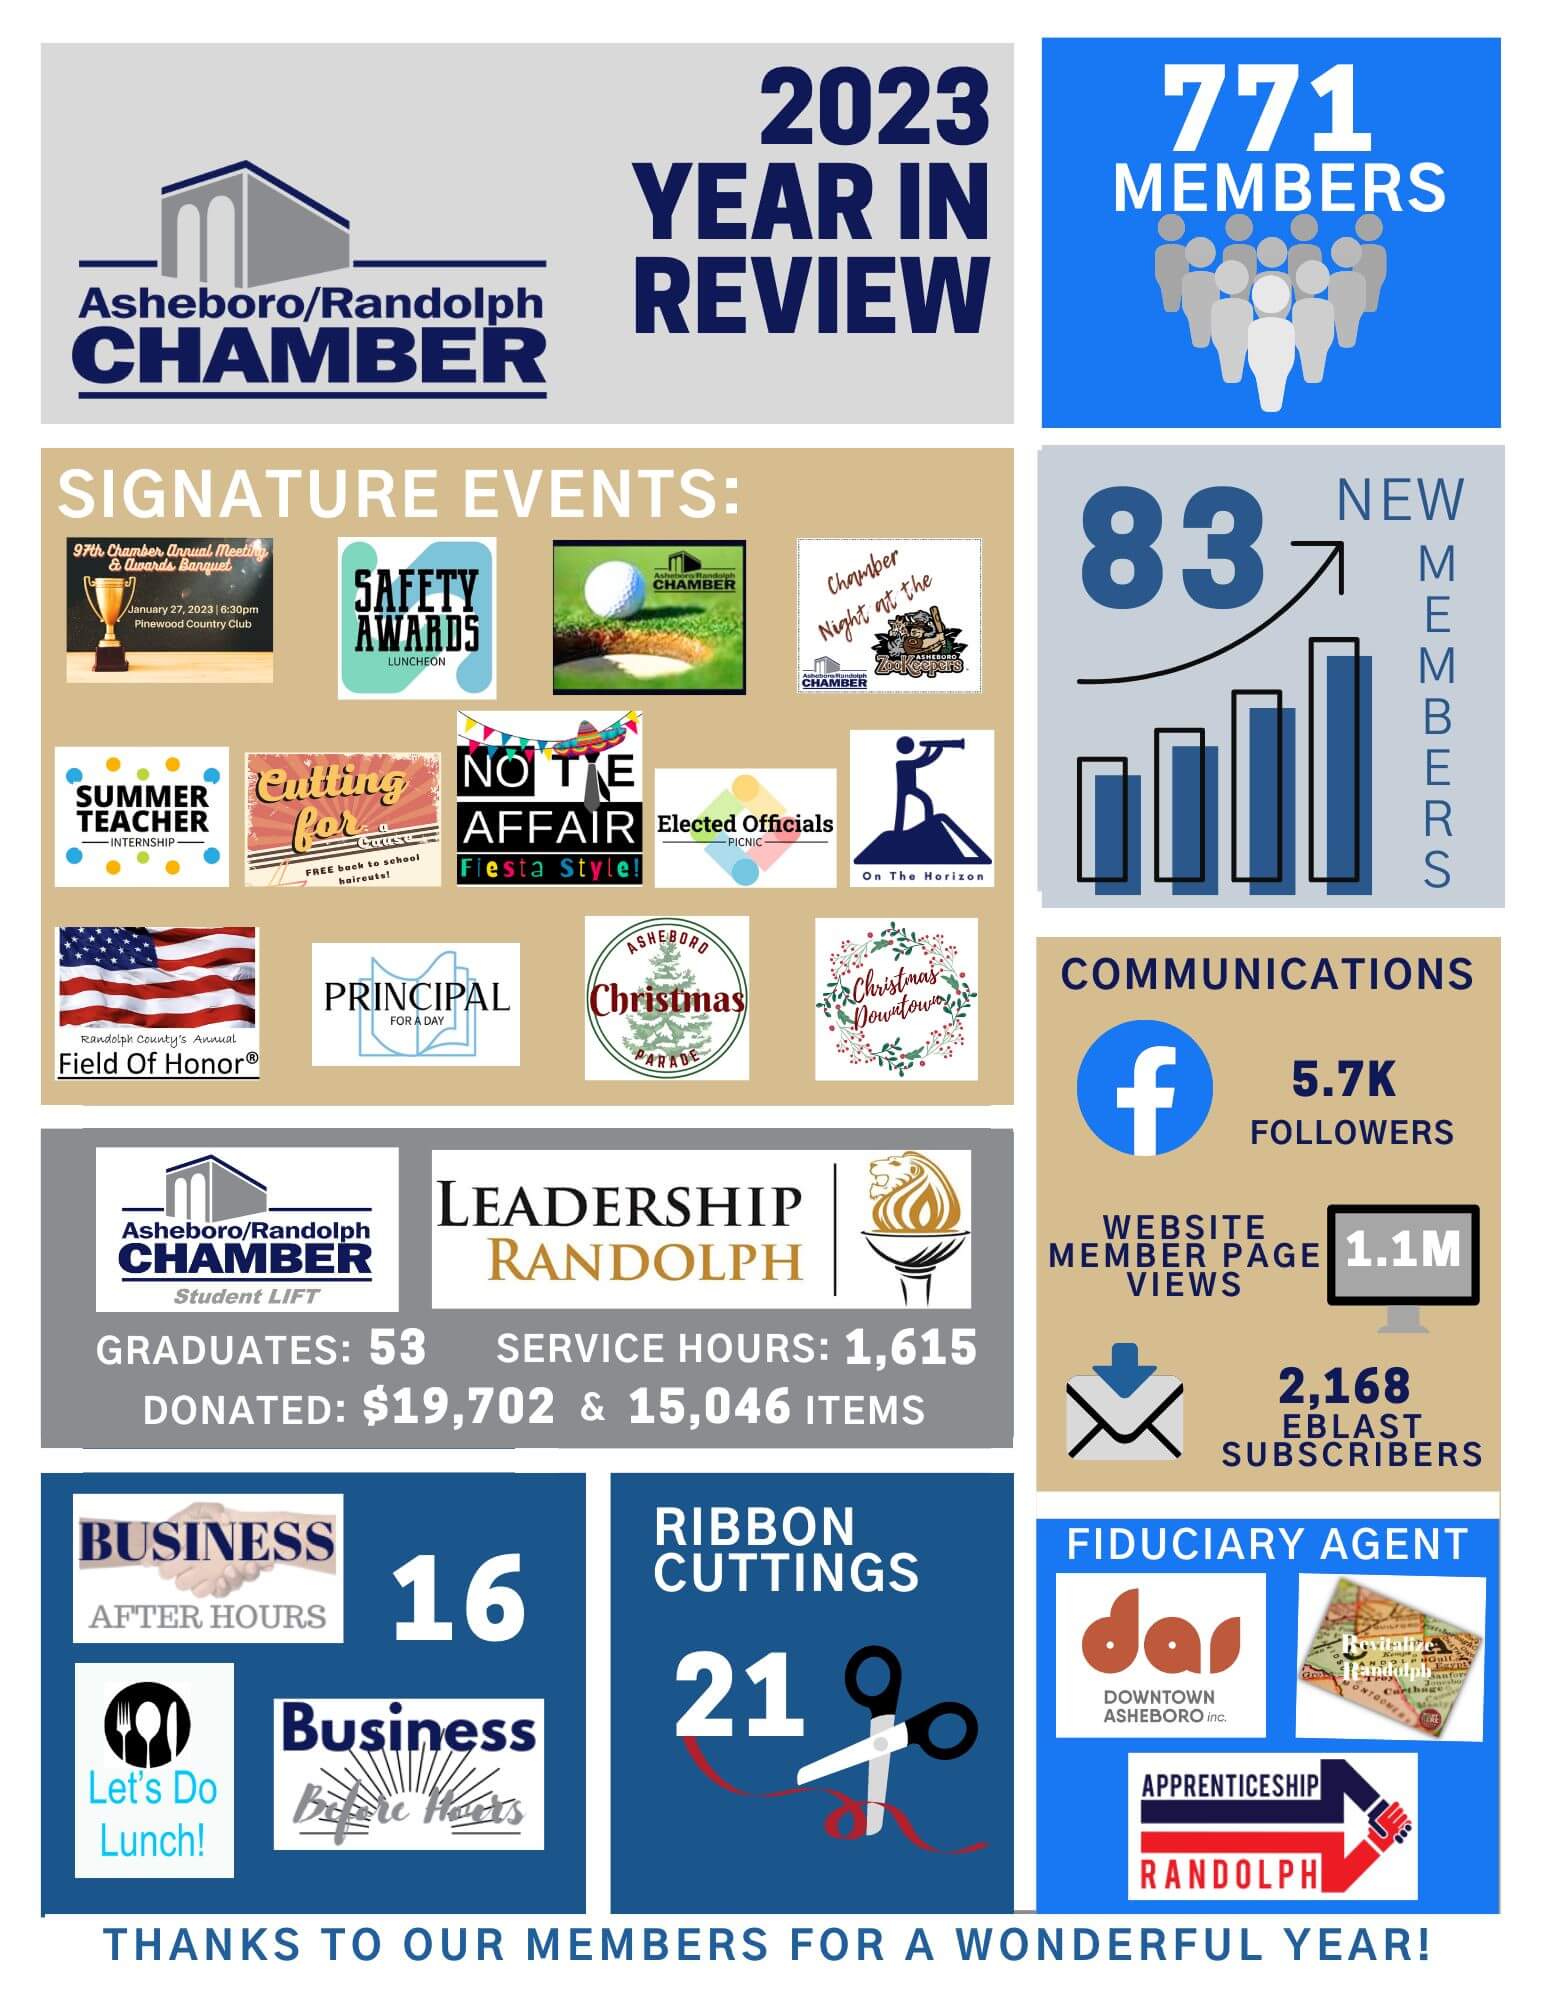 CHAMBER YEAR IN REVIEW 2023